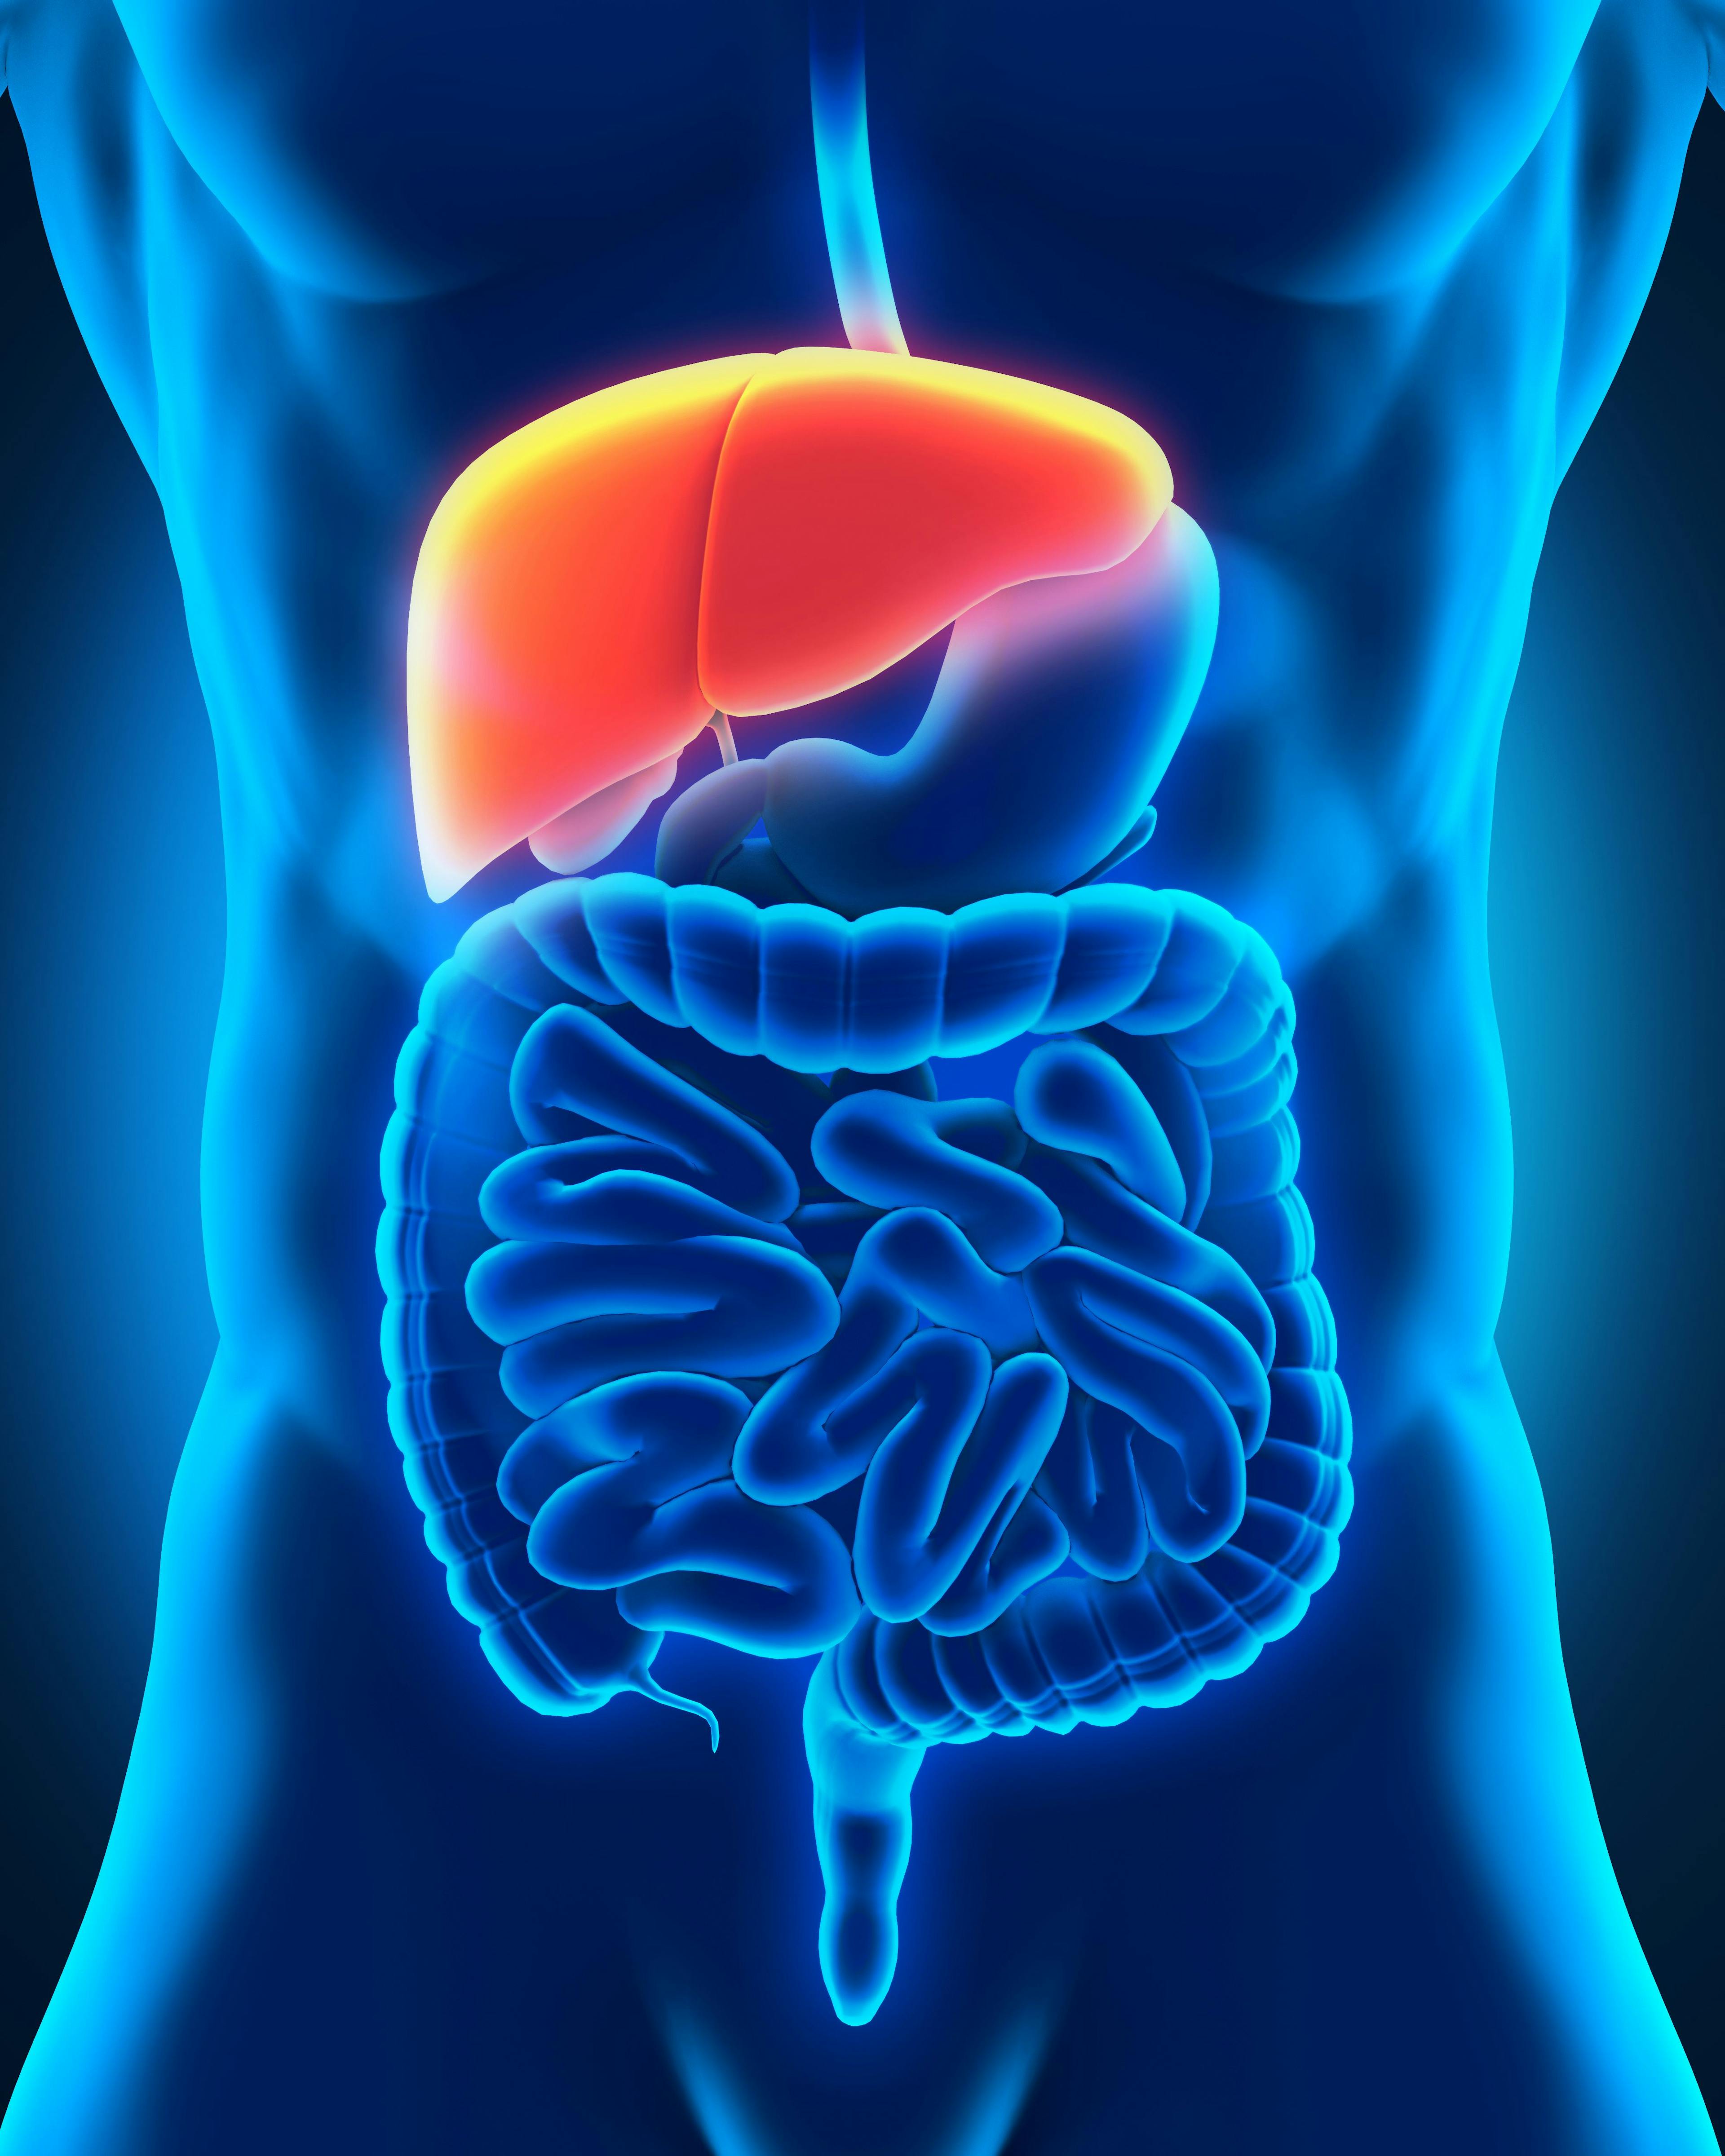 The safety profile of durvalumab plus tremelimumab among those with unresectable hepatocellular carcinoma in the phase 3 HIMALAYA trial was comparable with the known profiles of each individual agent.